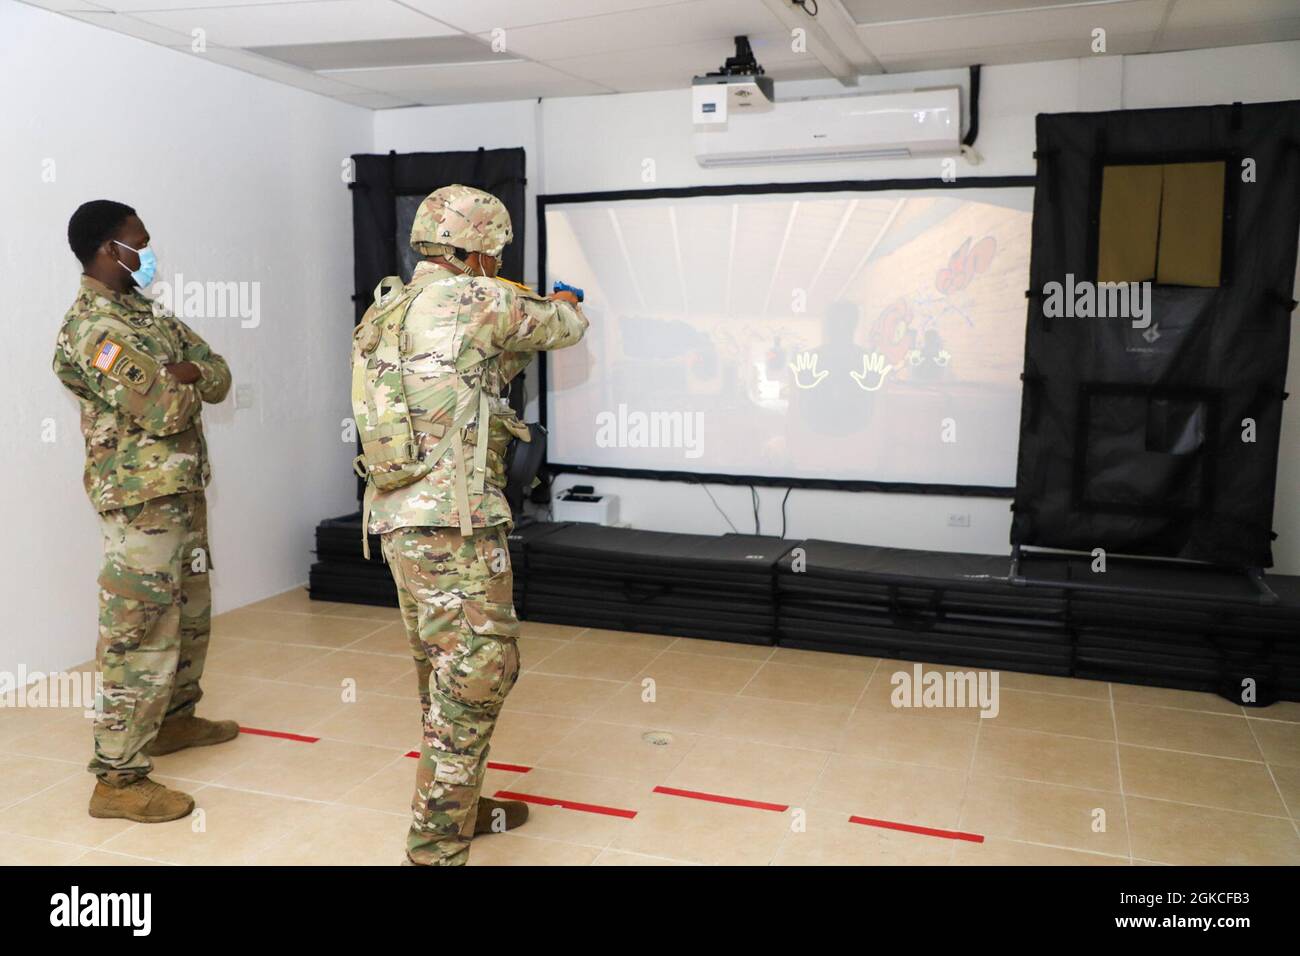 Pfc. Eddison Lewis (right) alongside Sgt. 1st Class Raynard Francis (left) conducting a virtual simulation mystery event at D&J Shooting Gallery during the Best Warrior Competition, St. Croix, March 12, 2021.    The VING BWC is a culminating test where the competing NCOs and soldiers spend five days competing in various challenges, including firing weapons, land navigation, the Army Physical Fitness Test, and other various events. These challenges will test each competitor's knowledge, technical and tactical skills, physical endurance, mental toughness, and overall combat readiness. Stock Photo